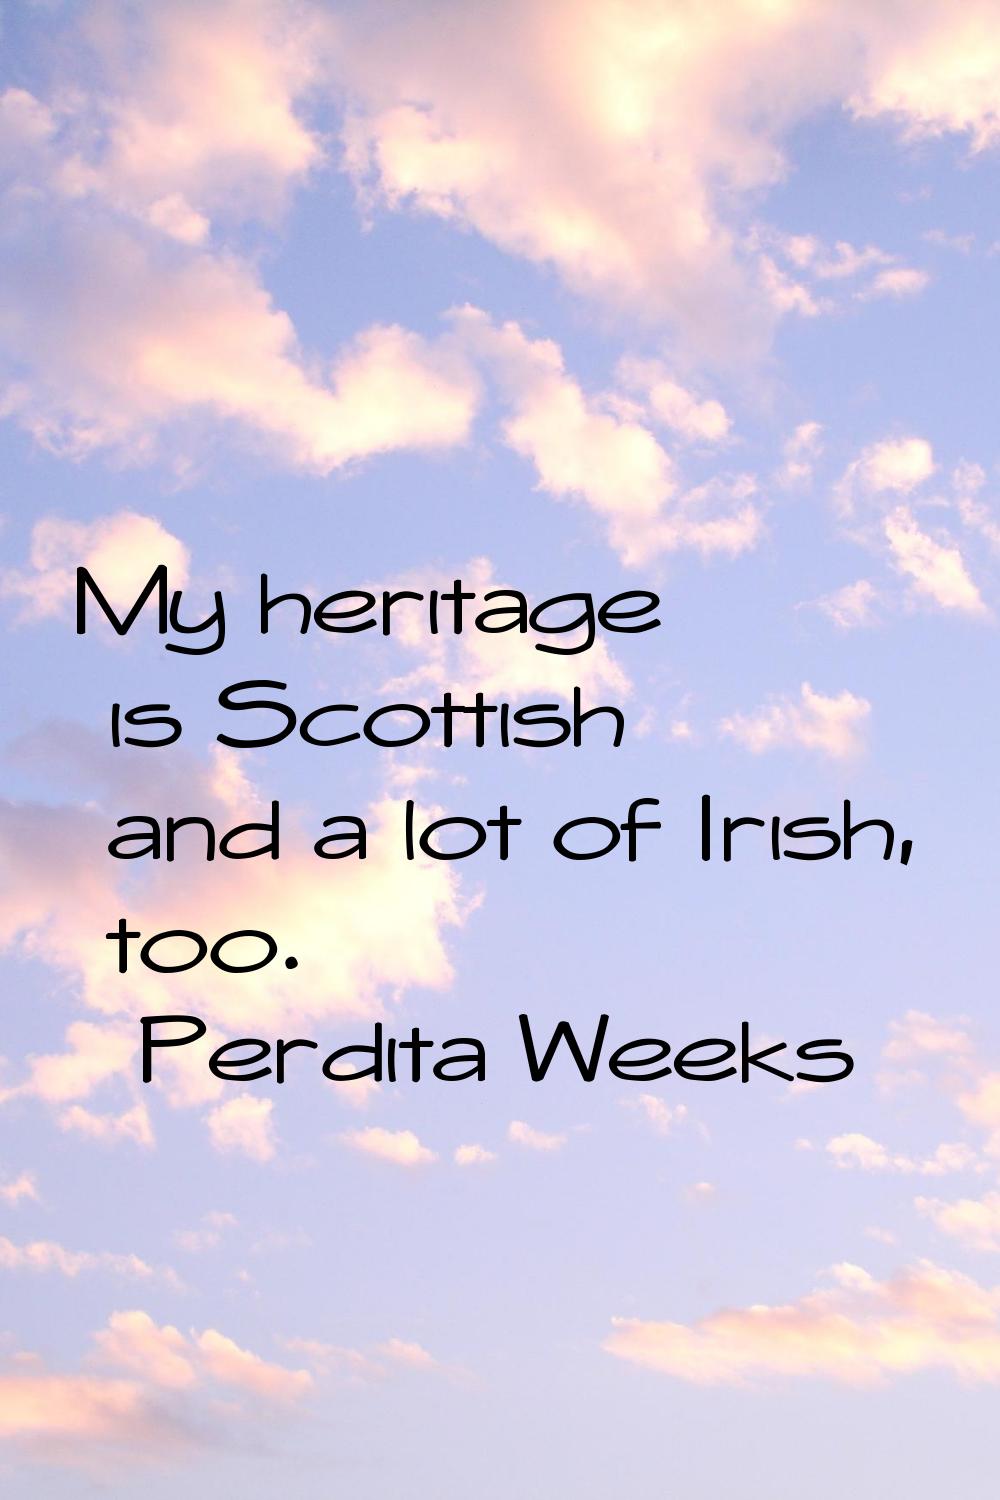 My heritage is Scottish and a lot of Irish, too.